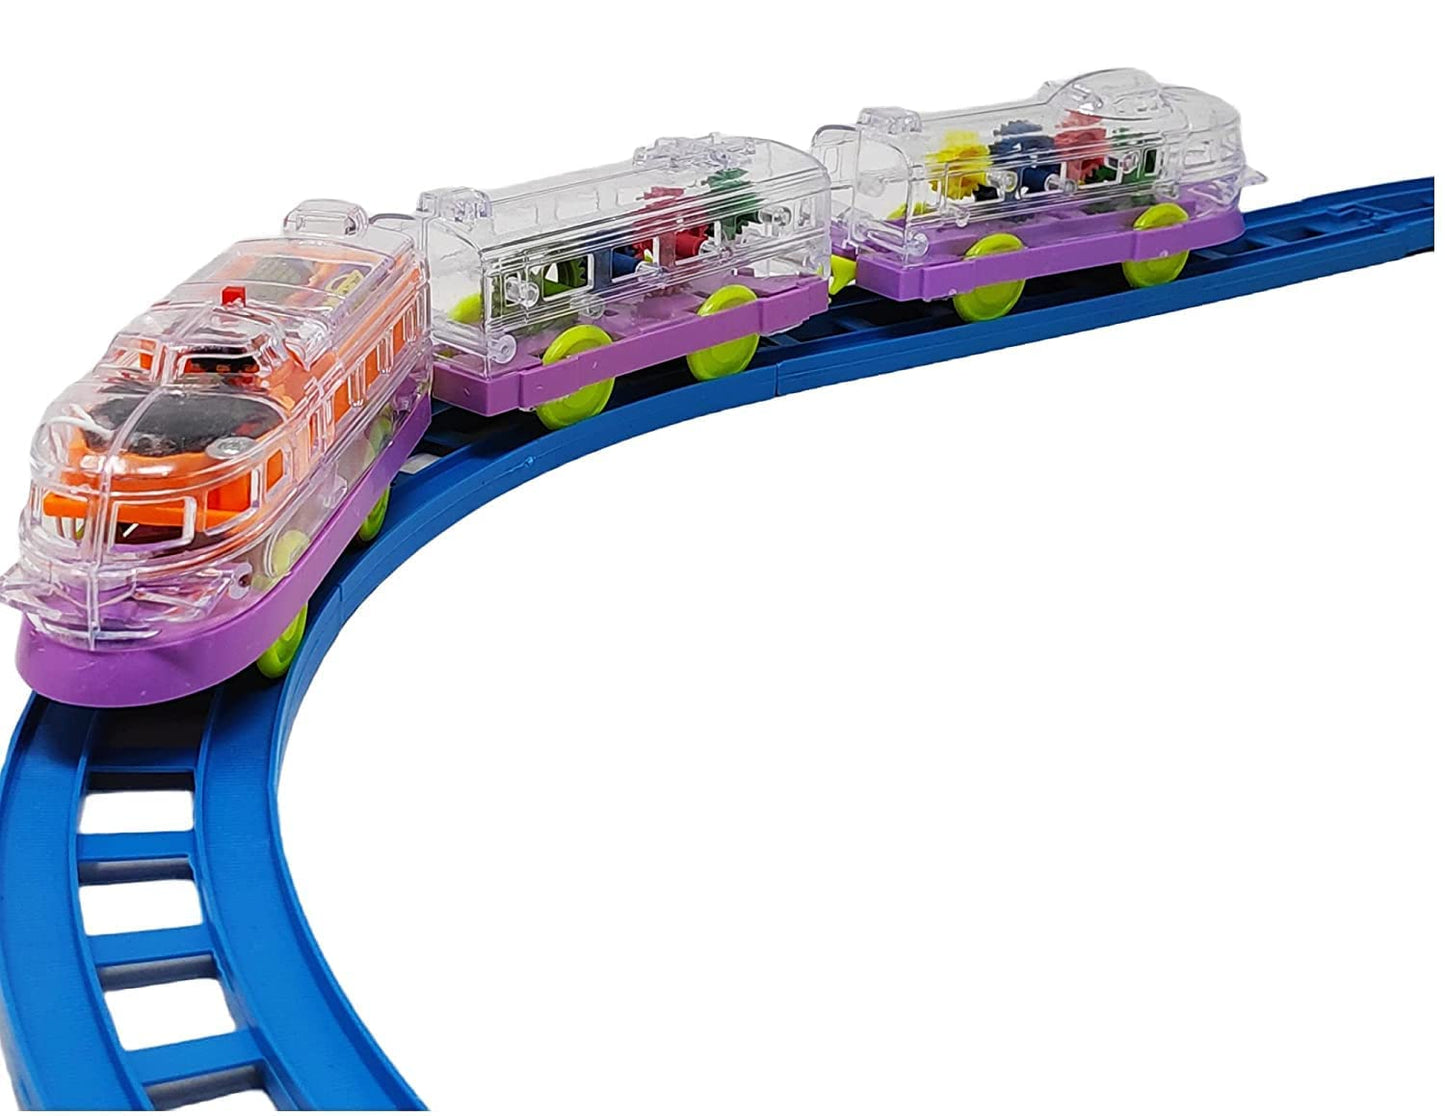 Train Set, Train With Long Track For Kids With Rotating Gears Transparent Plastic Body